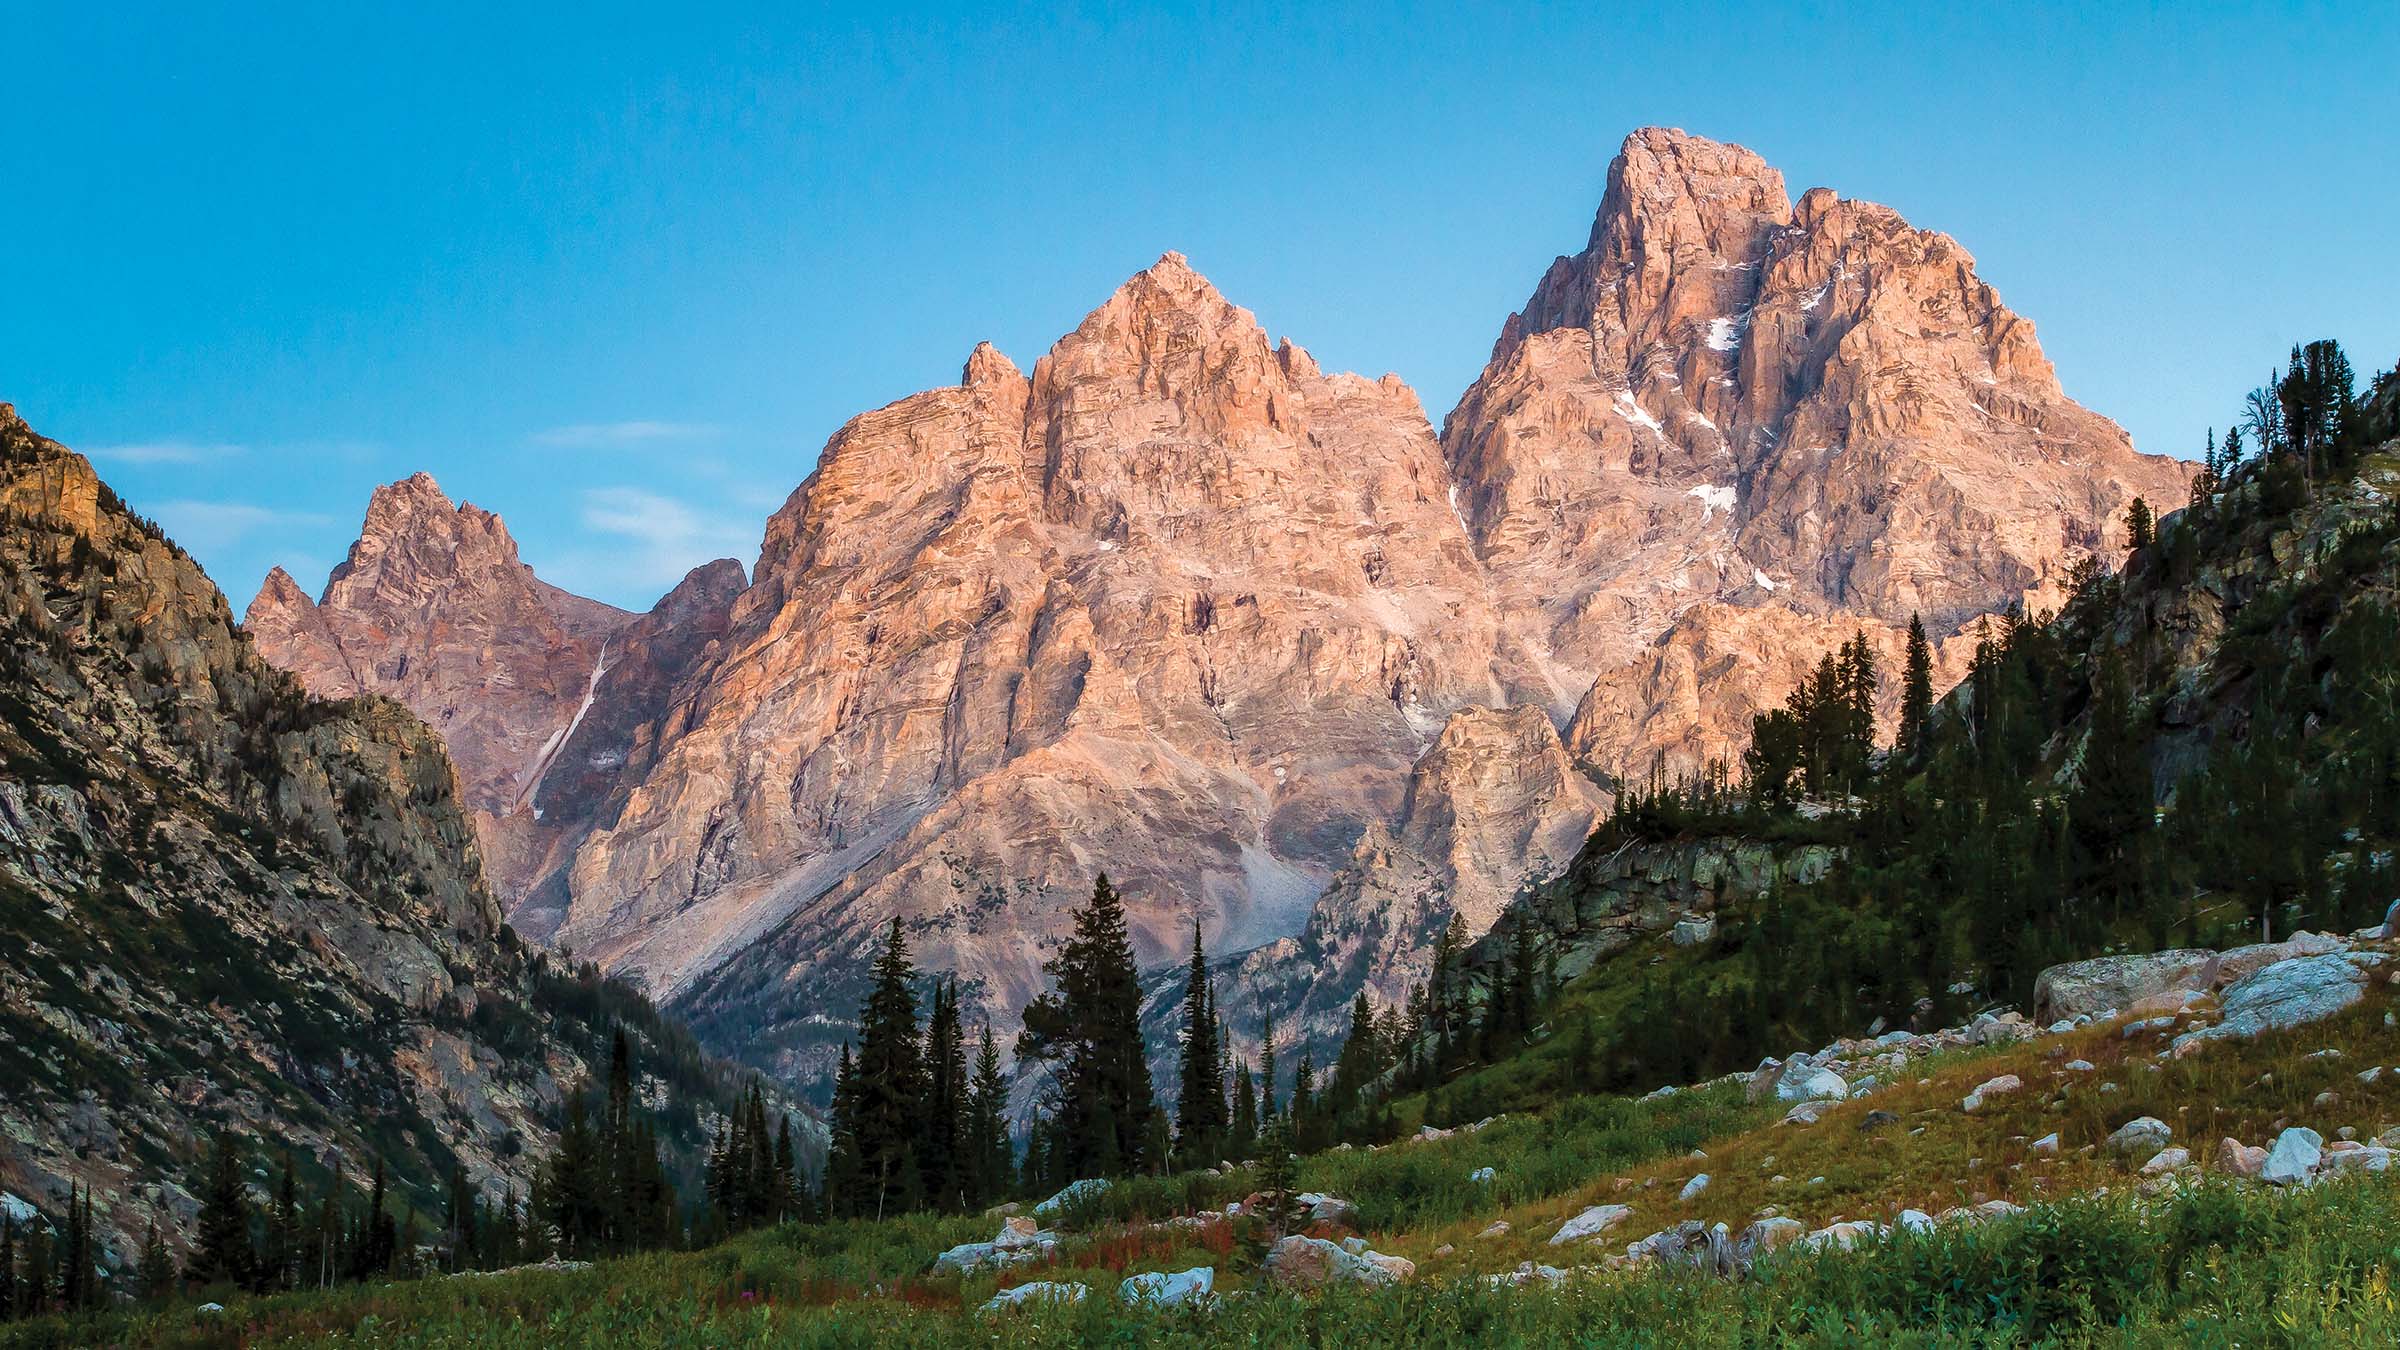 The 50 Best Hikes in the US - Backpacker